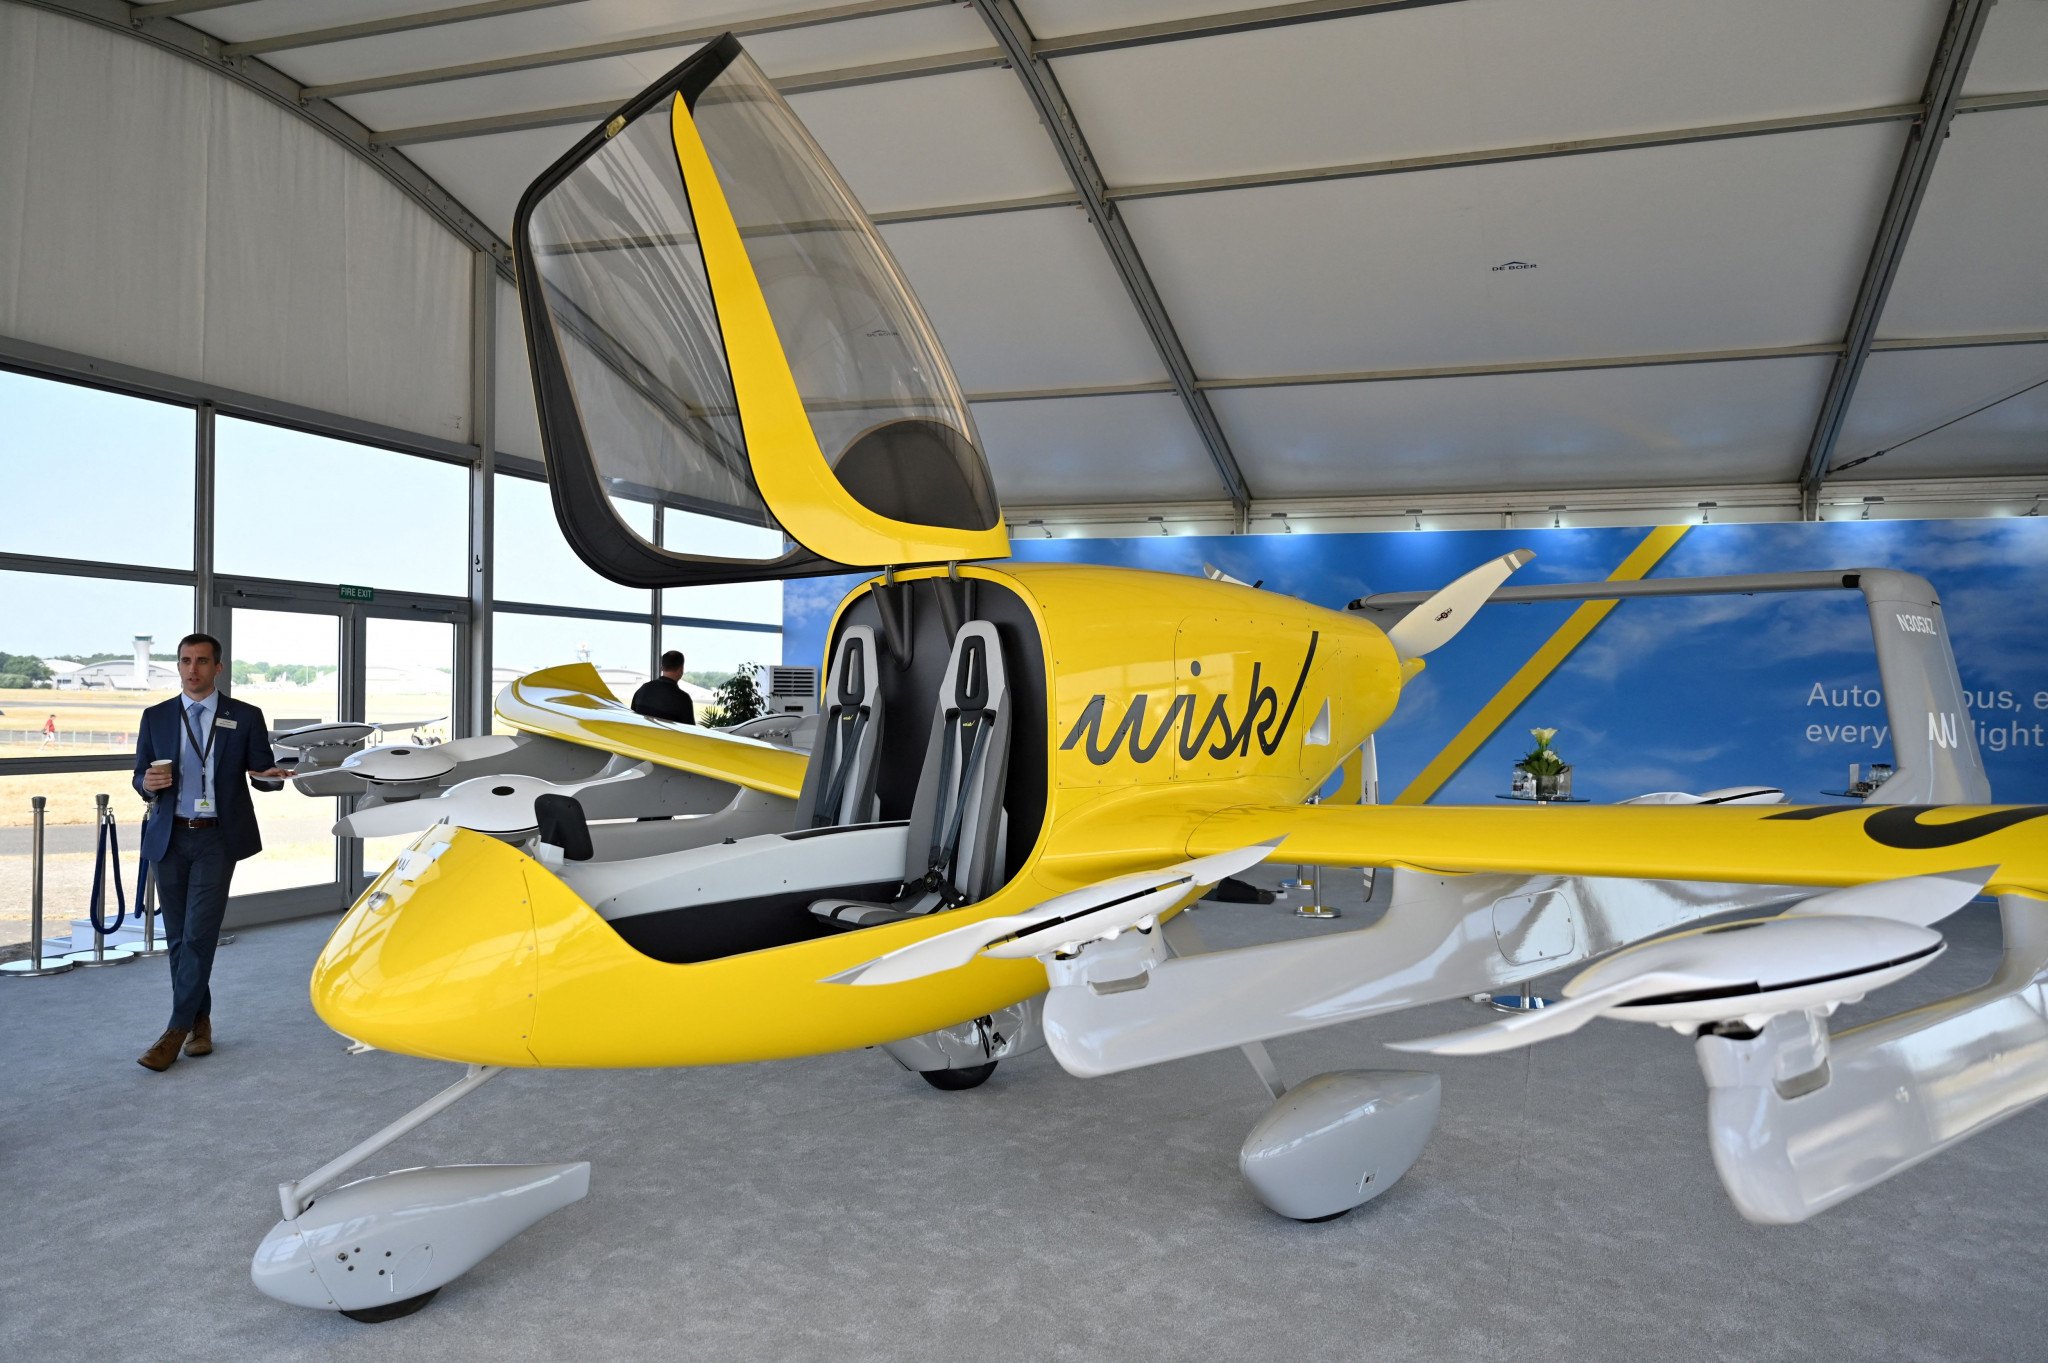 Queensland Governments looking to use self-flying air taxis at Brisbane 2032 Olympics